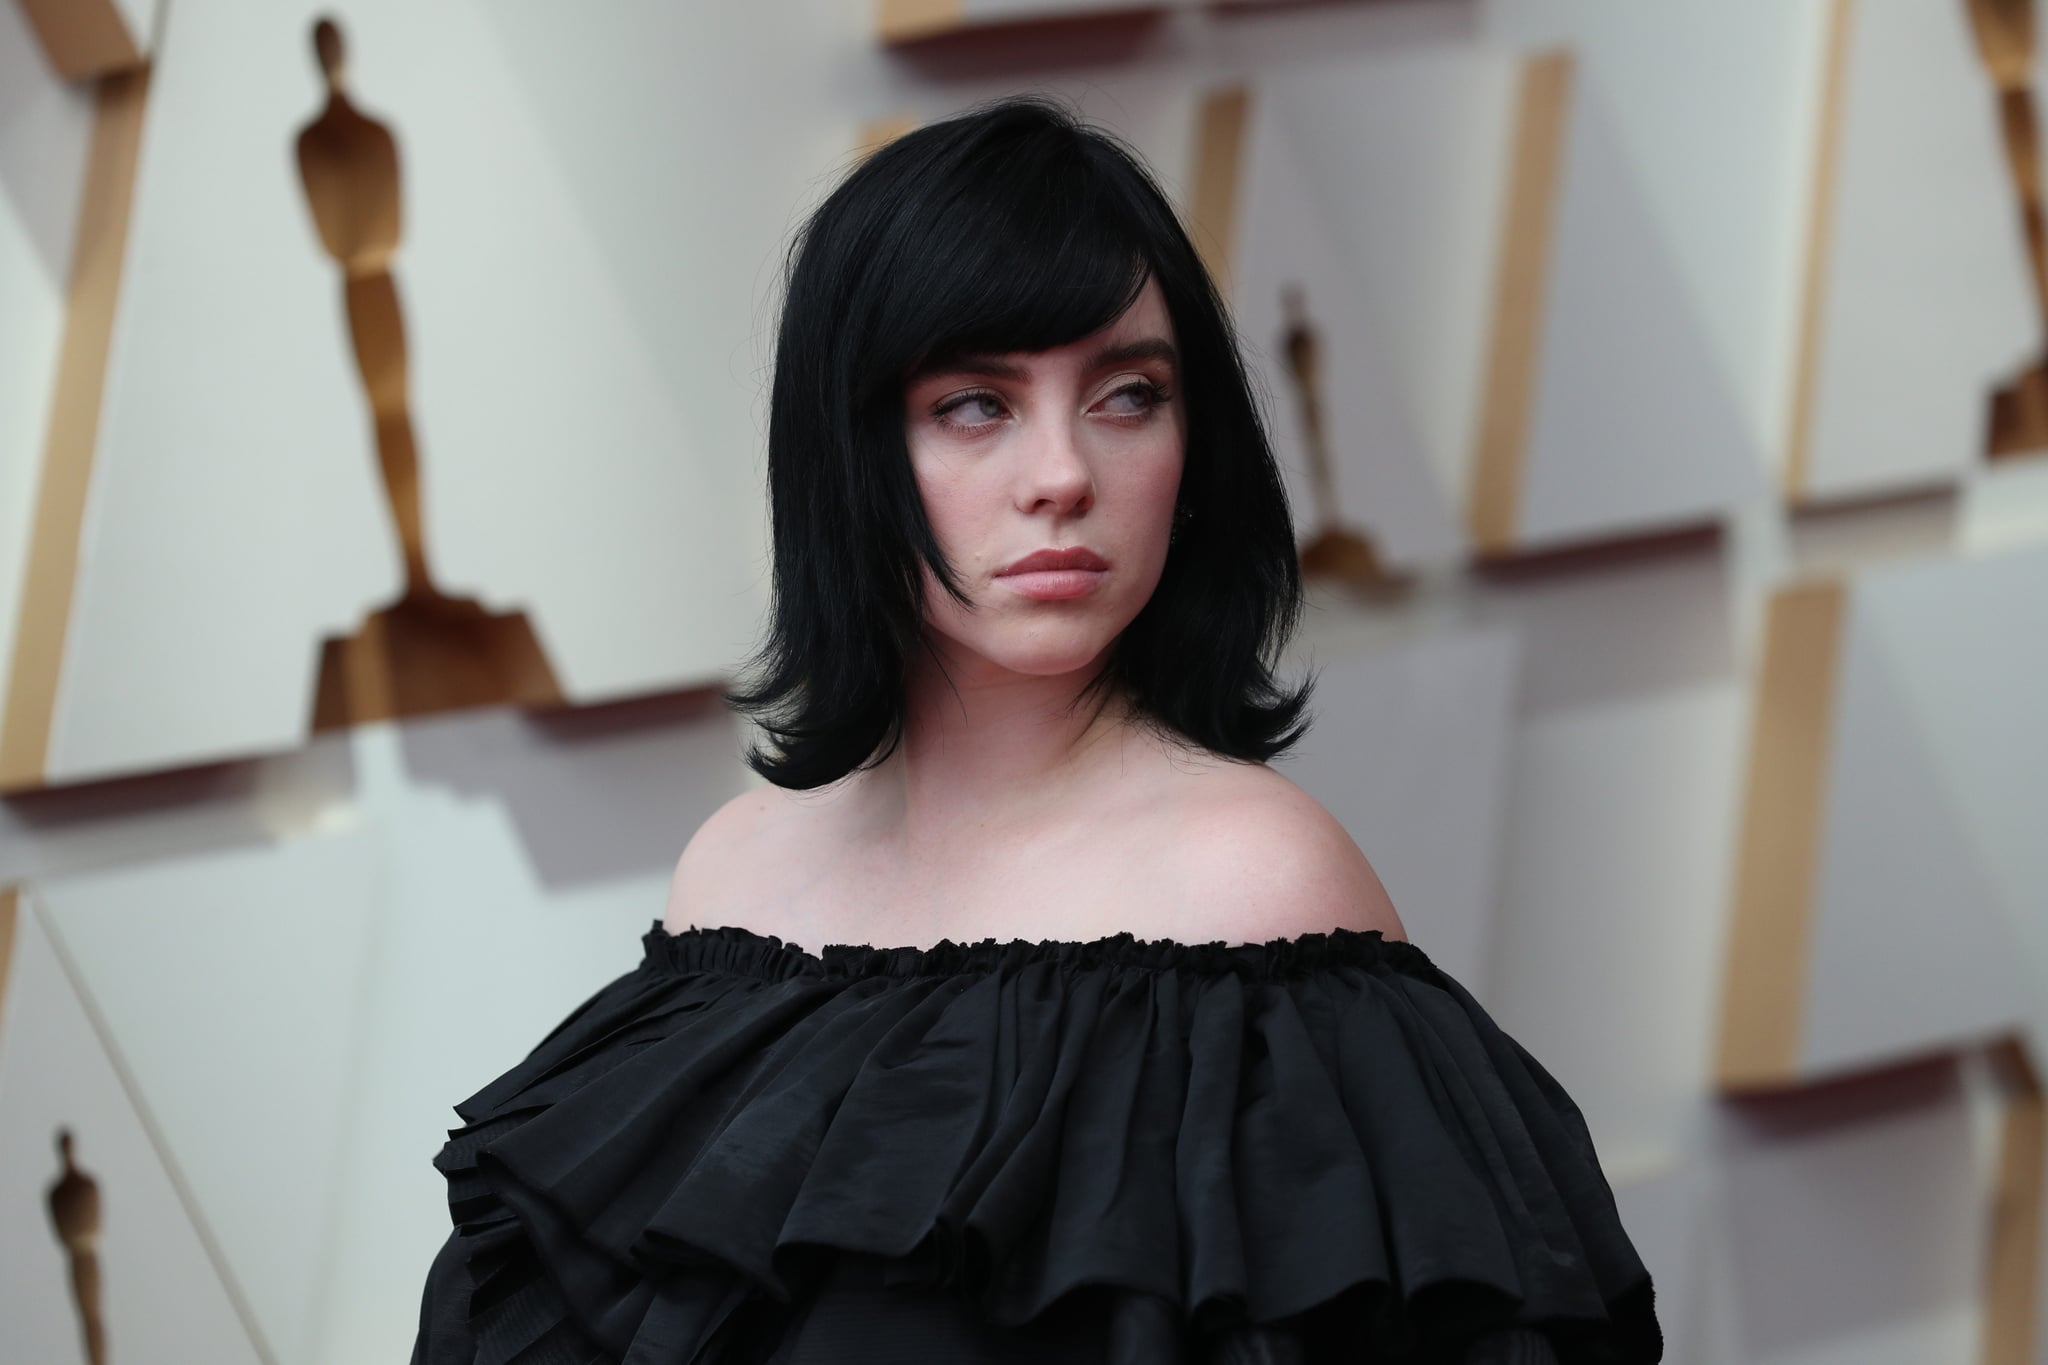 THE OSCARS®  The 94th Oscars® aired live Sunday March 27, from the Dolby® Theatre at Ovation Hollywood at 8 p.m. EDT/5 p.m. PDT on ABC in more than 200 territories worldwide. (ABC via Getty Images)BILLIE EILISH